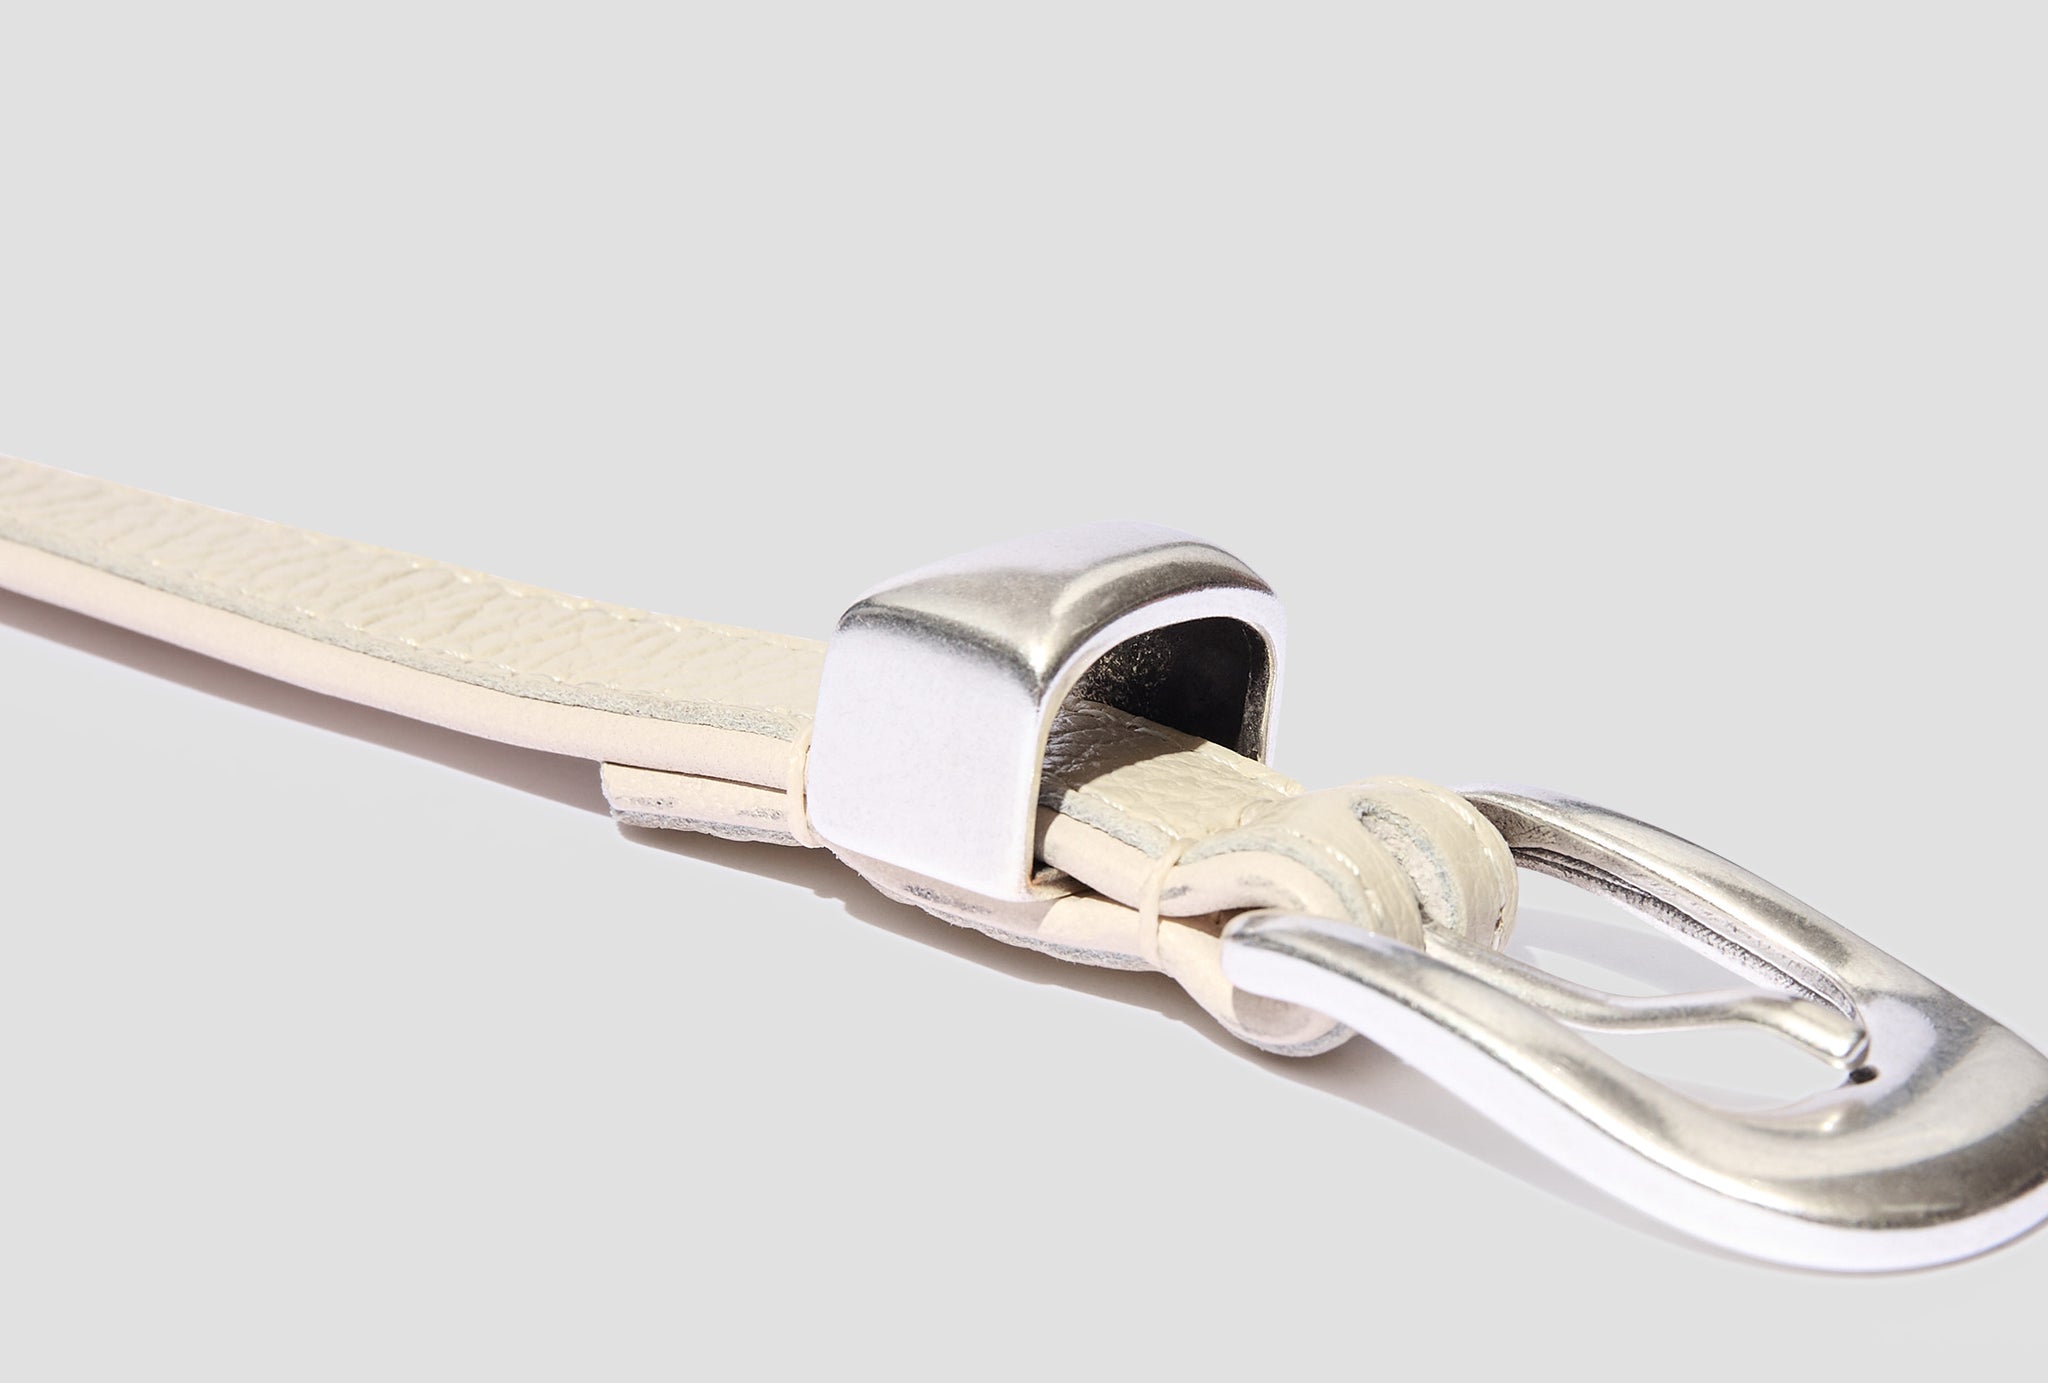 2 CM BELT - OFF WHITE LEATHER A22382OW Off white